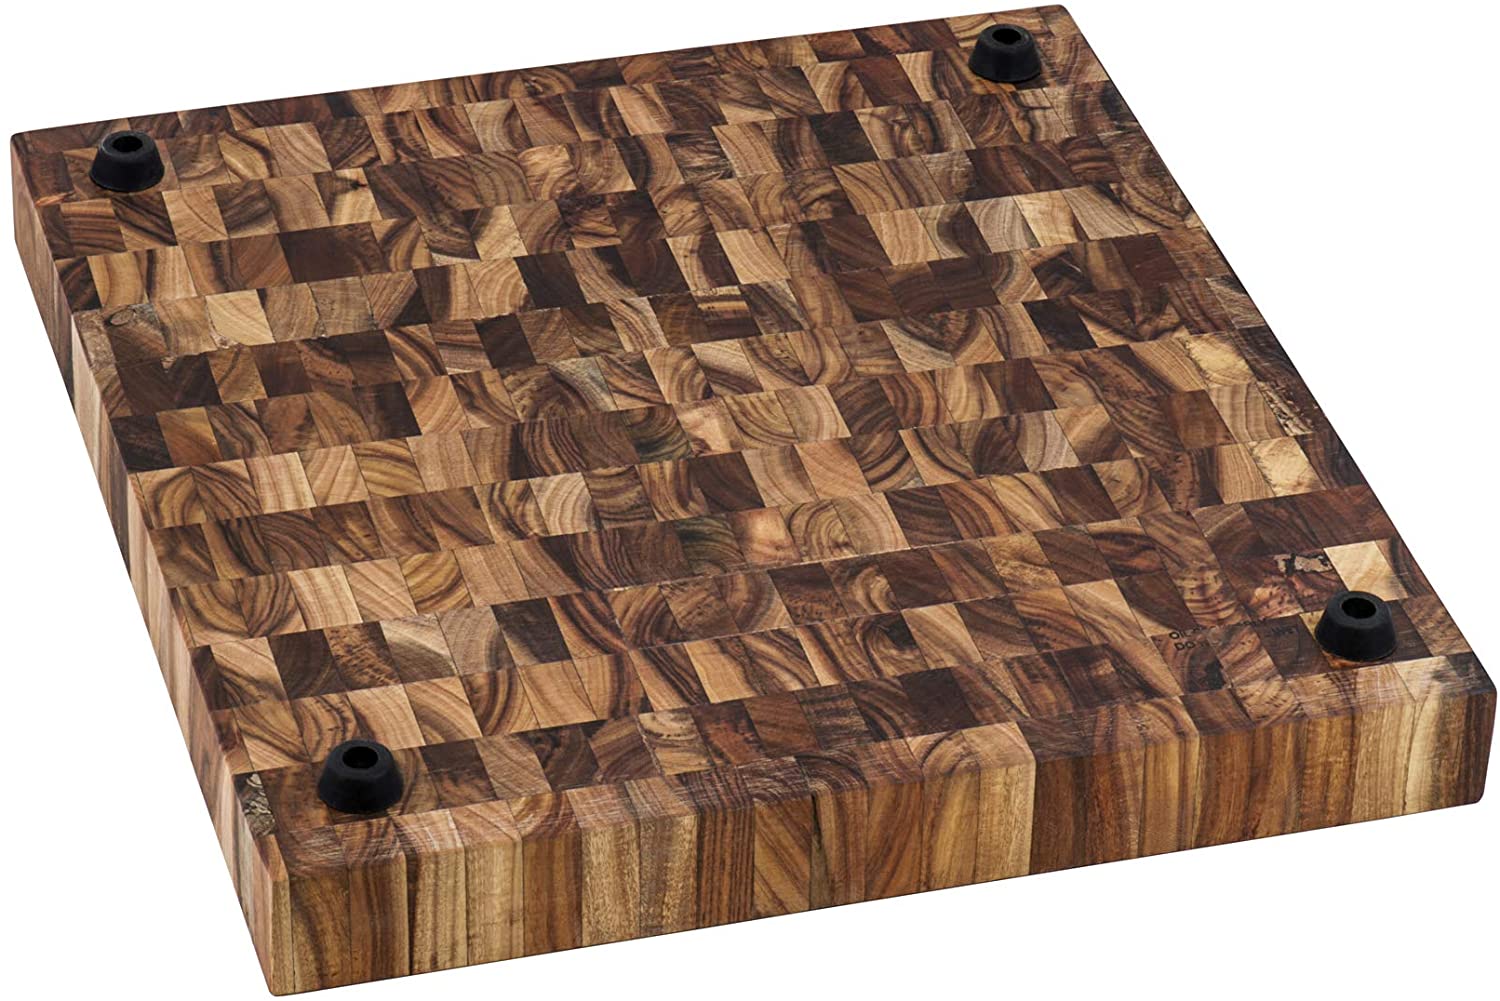 Wood End Grain Cutting Boards Wooden Butcher Block Meat Cutting Wood Thick Board Round Wood Chopping Boards, Size: 27.9, Brown